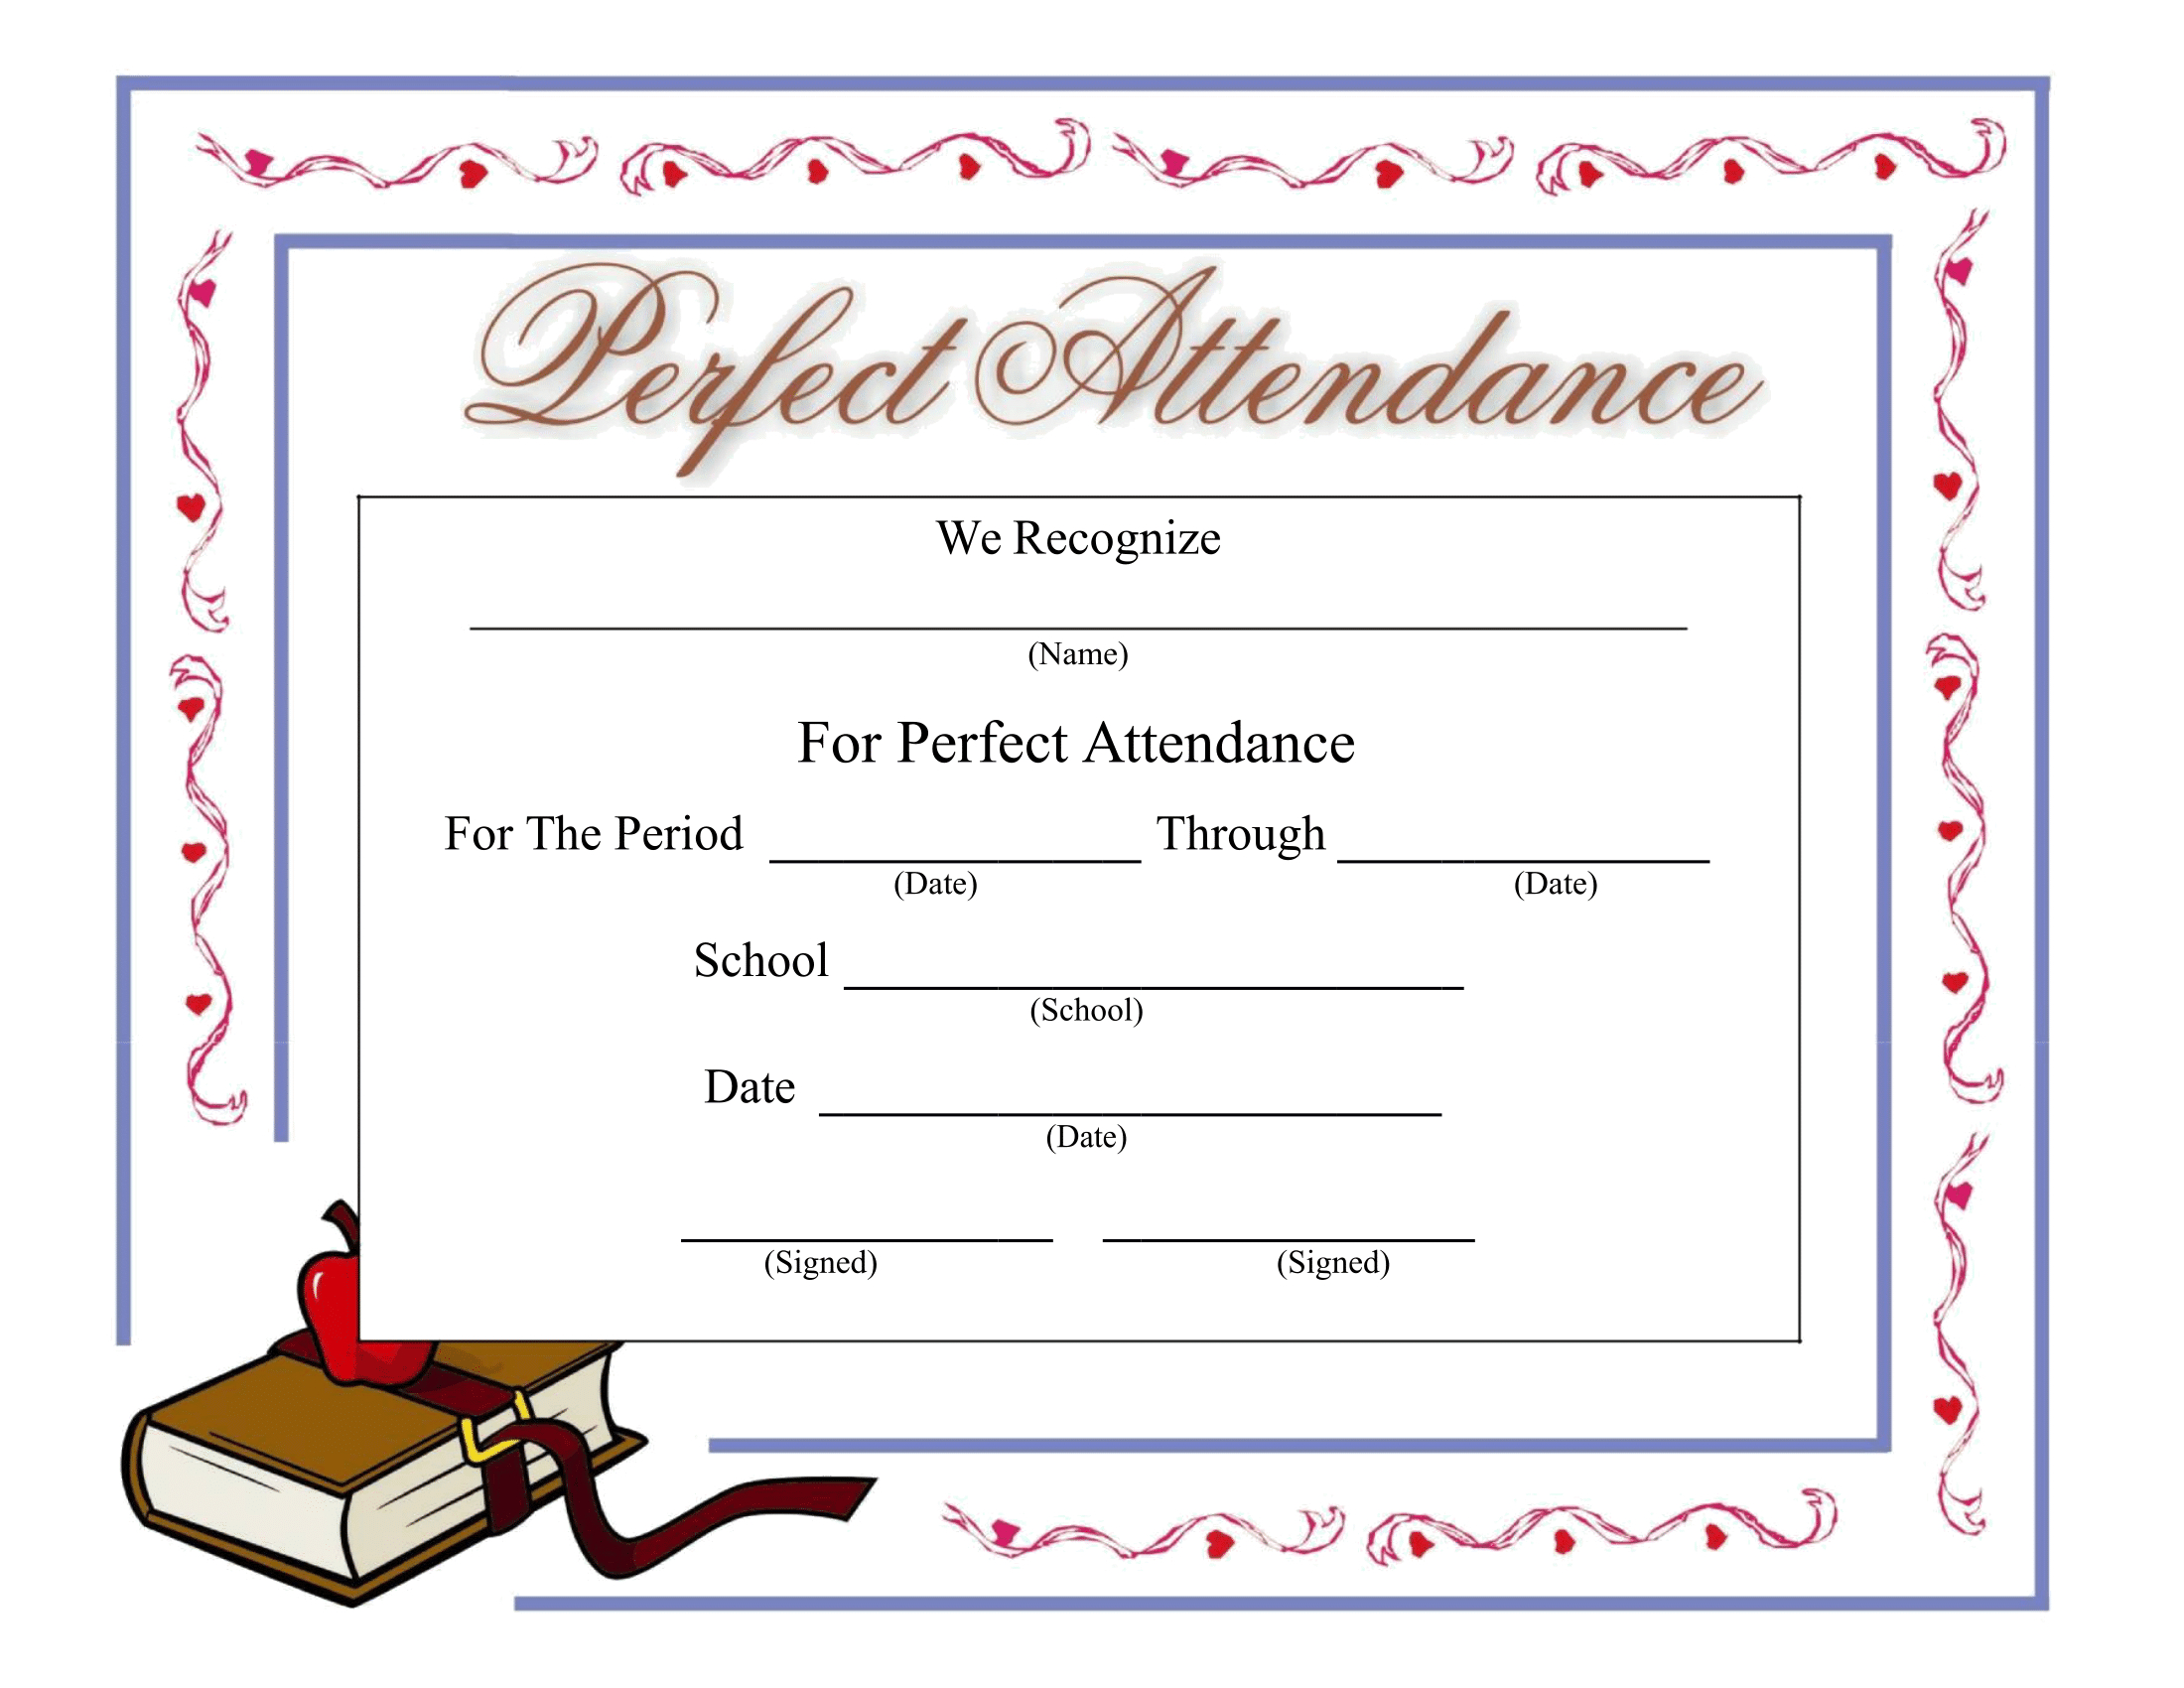 stupendous-perfect-attendance-certificate-printable-dora-s-throughout